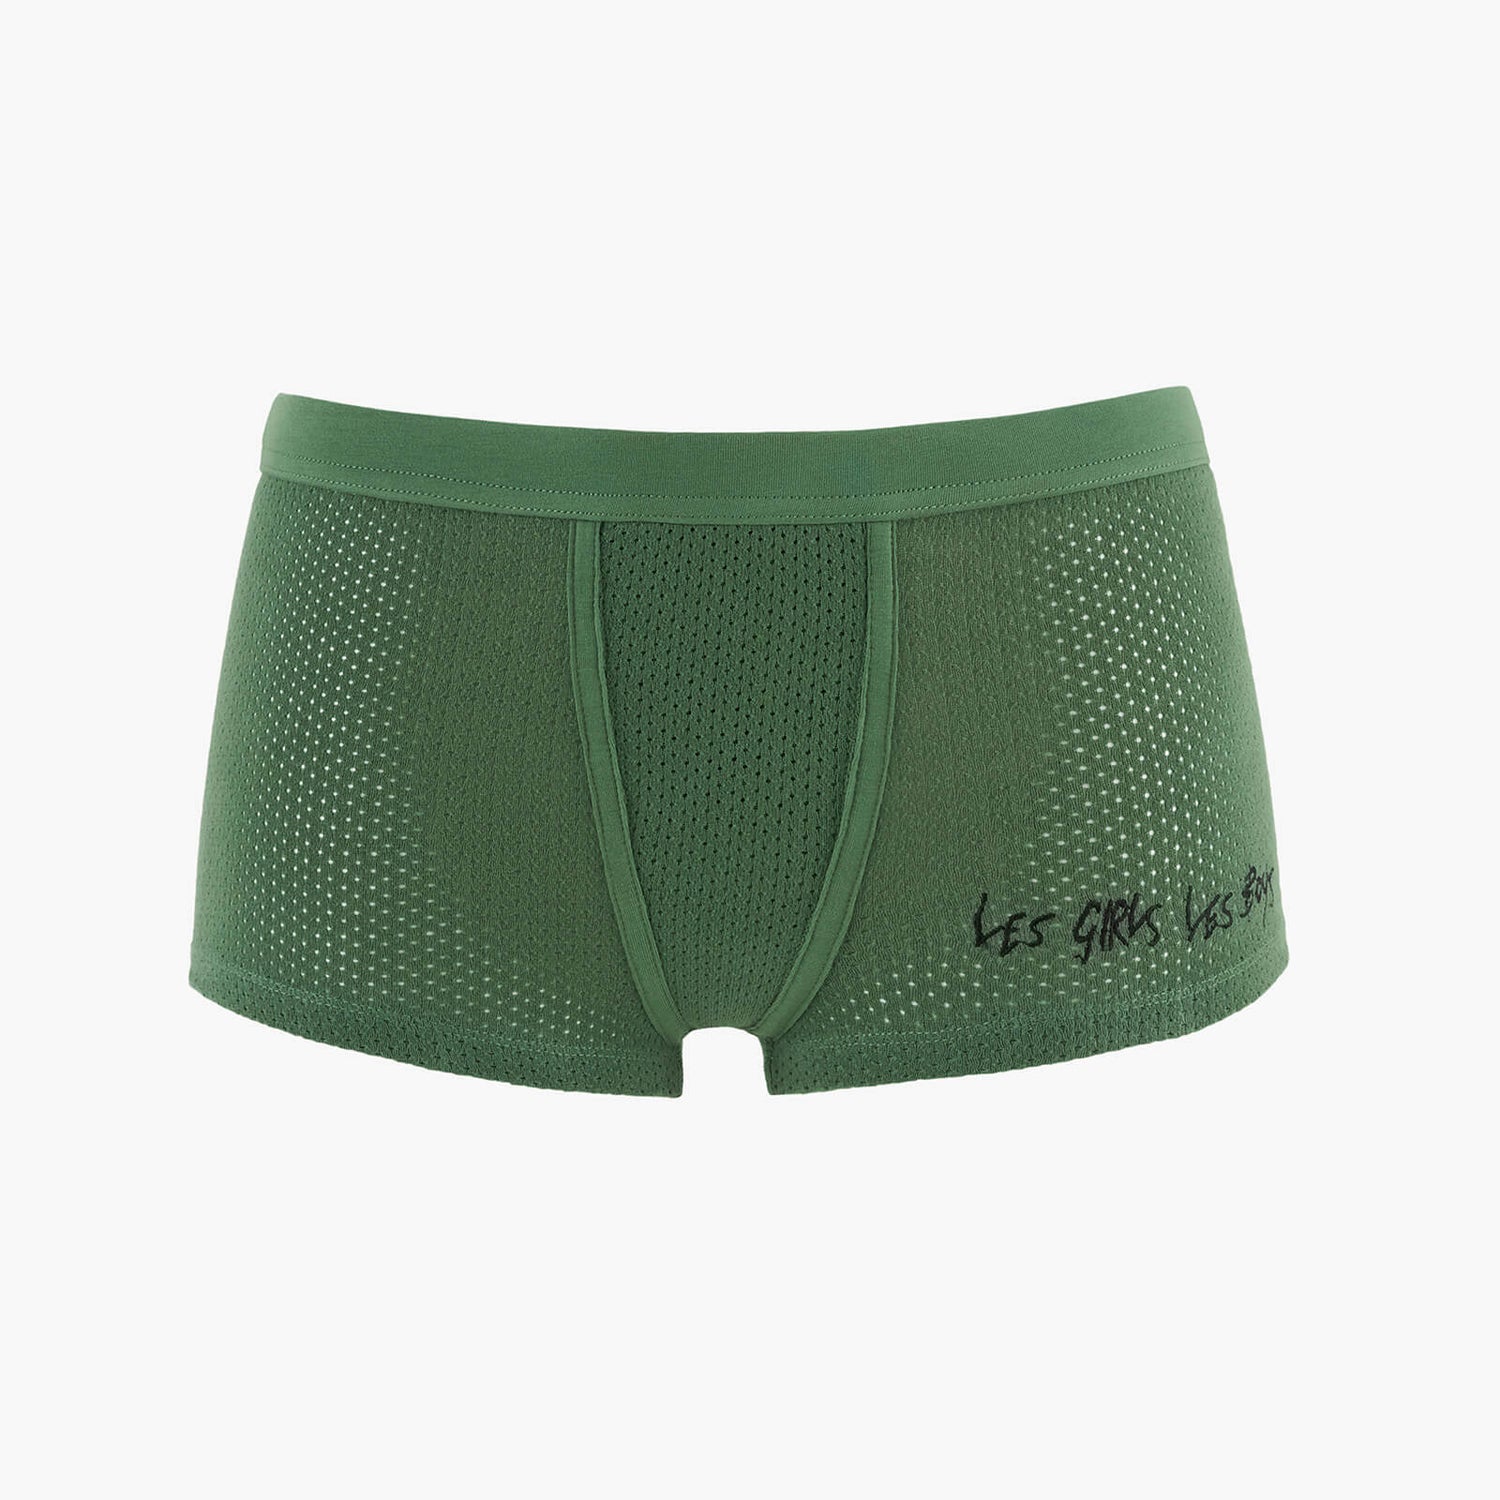 Les Girls Les Boys Women's Cotton Perforated Shorts - Green - XS